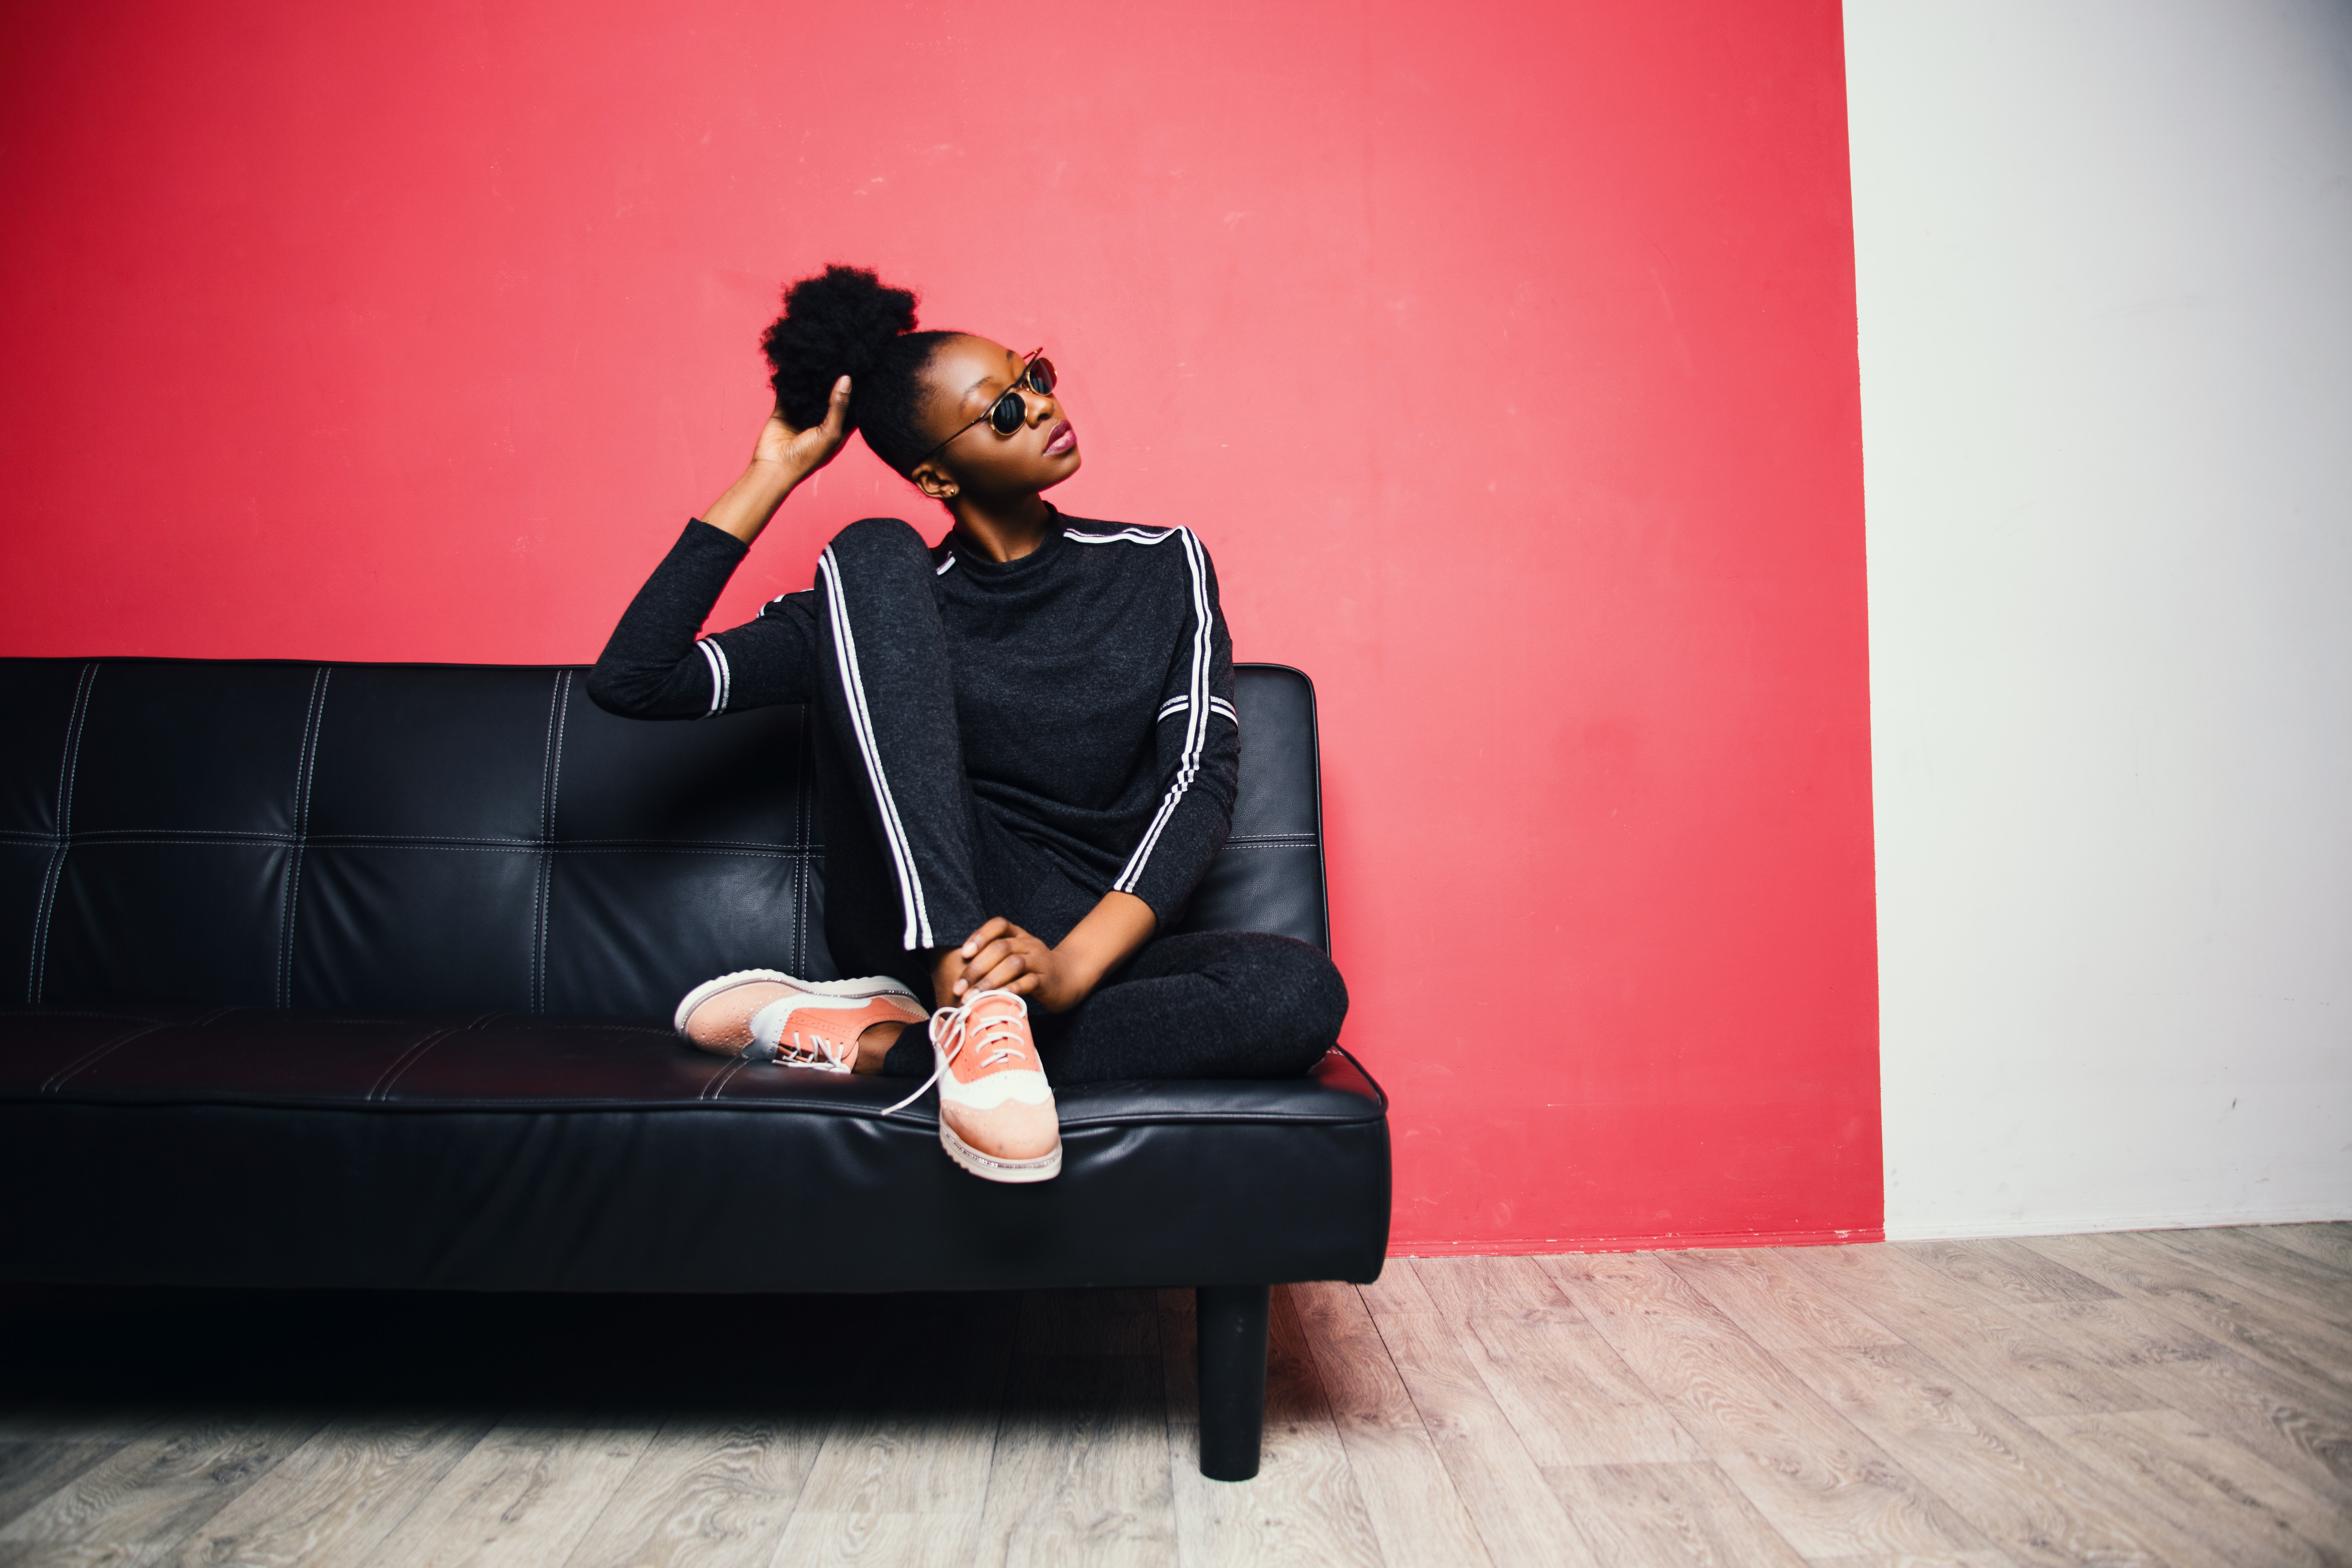 Woman with black-and-white sweater with pants sitting on black leather sofa beside red painted wall photo